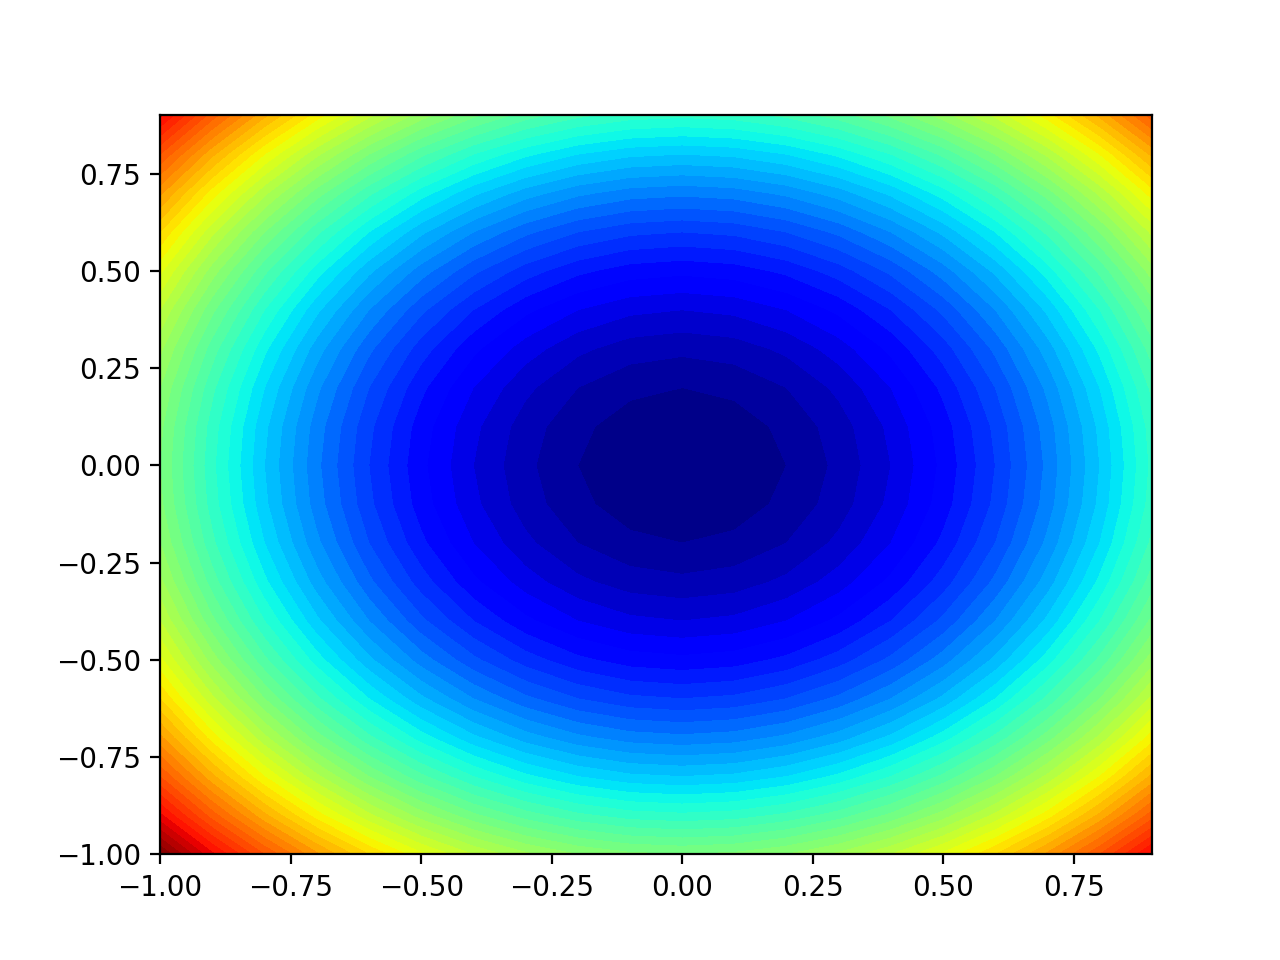 Two-Dimensional Contour Plot of the Test Objective Function